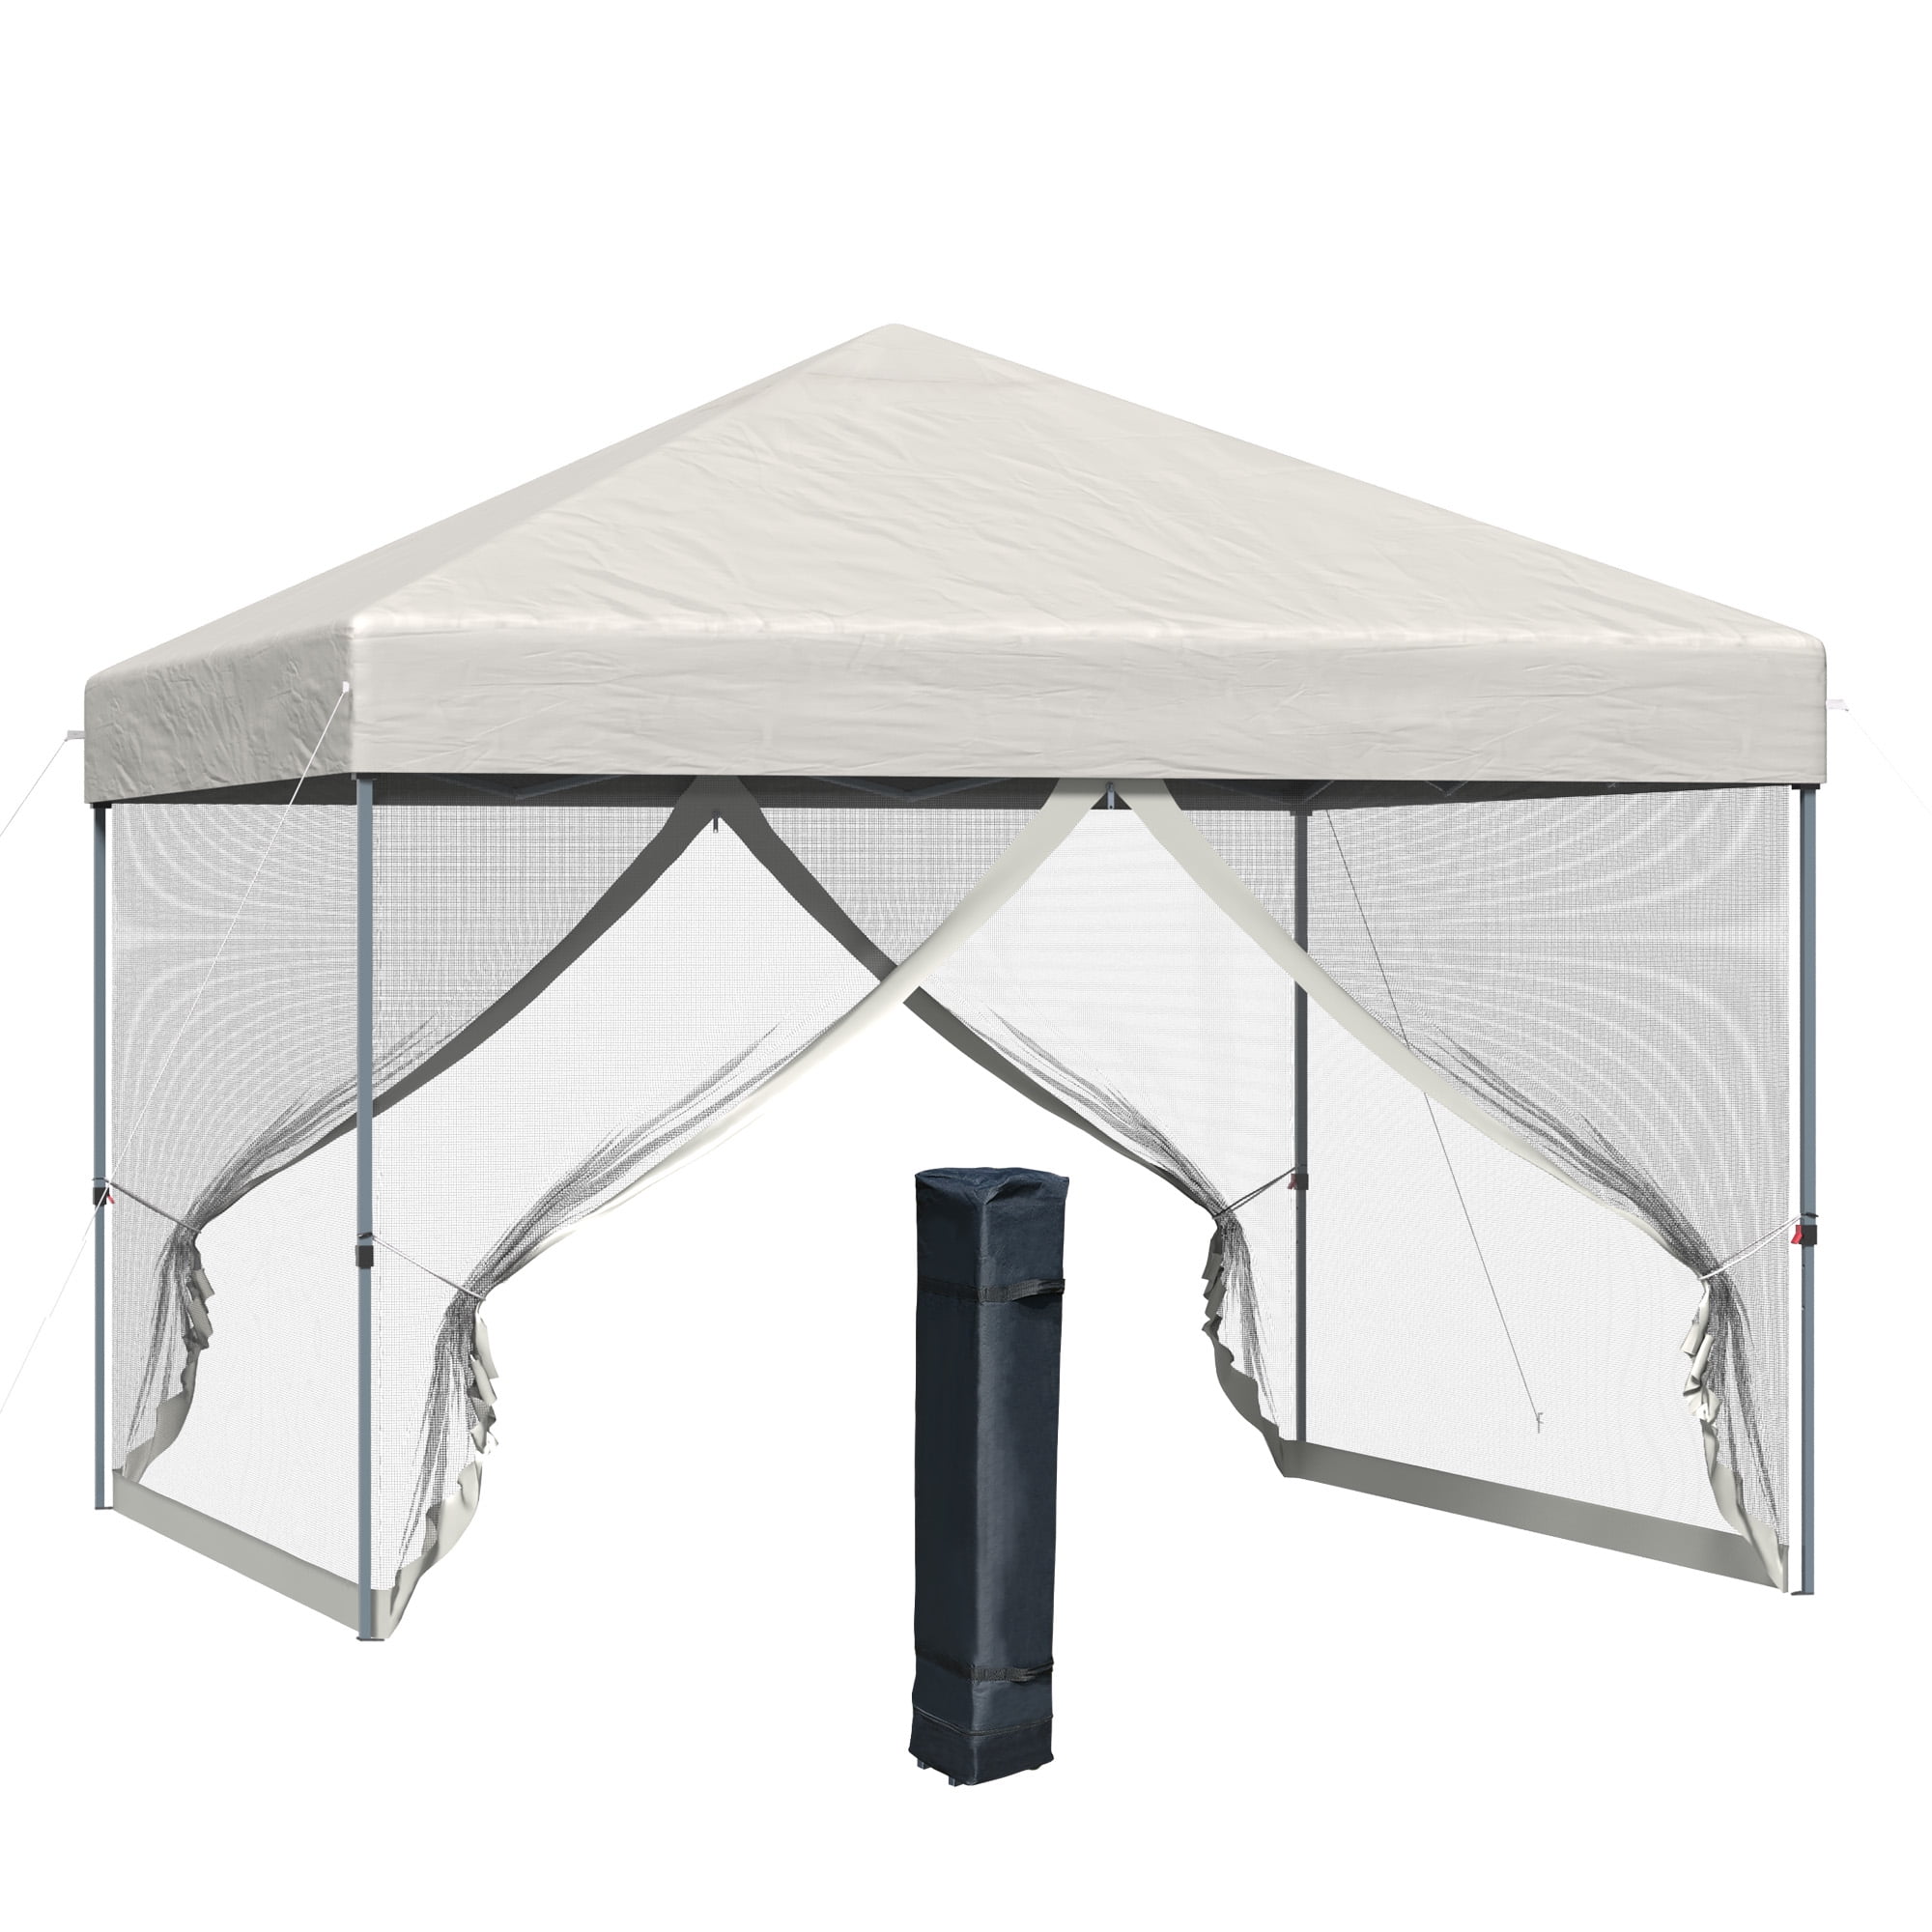 Outsunny x 10' Outdoor Pop up Party Tent Canopy, Beige, Pop up Tent - Walmart.com